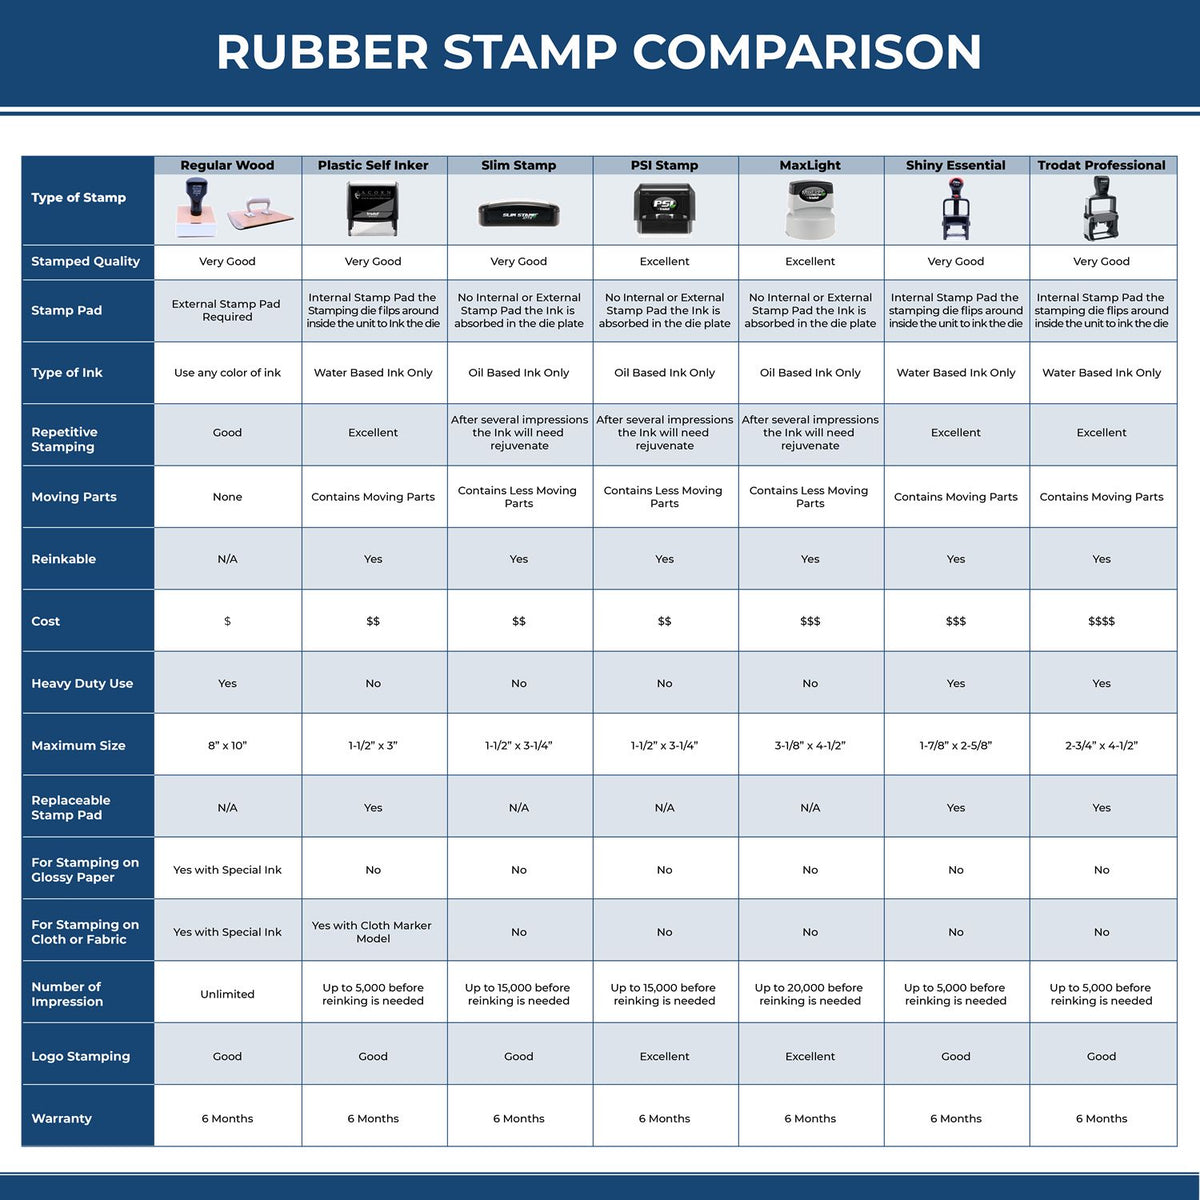 Large Self Inking Advanced Placement Stamp 4634S Rubber Stamp Comparison